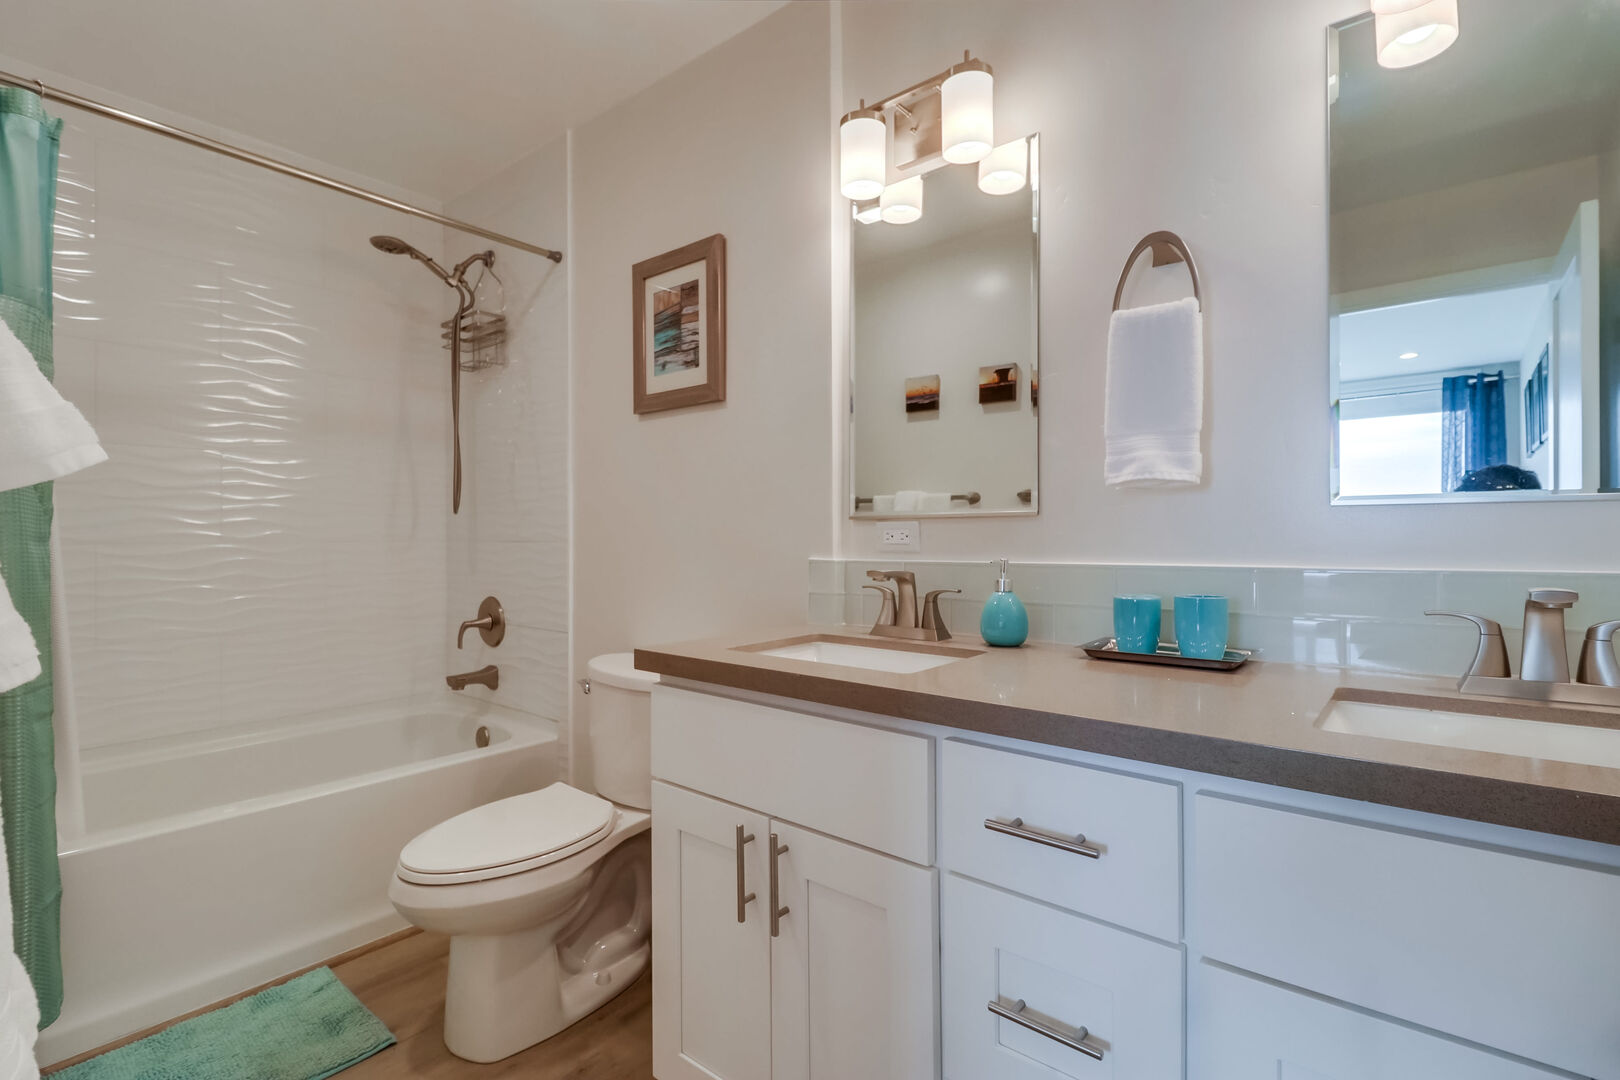 Master in-suite bathroom with dual vanity, ample storage space, toilet and tub/shower combo